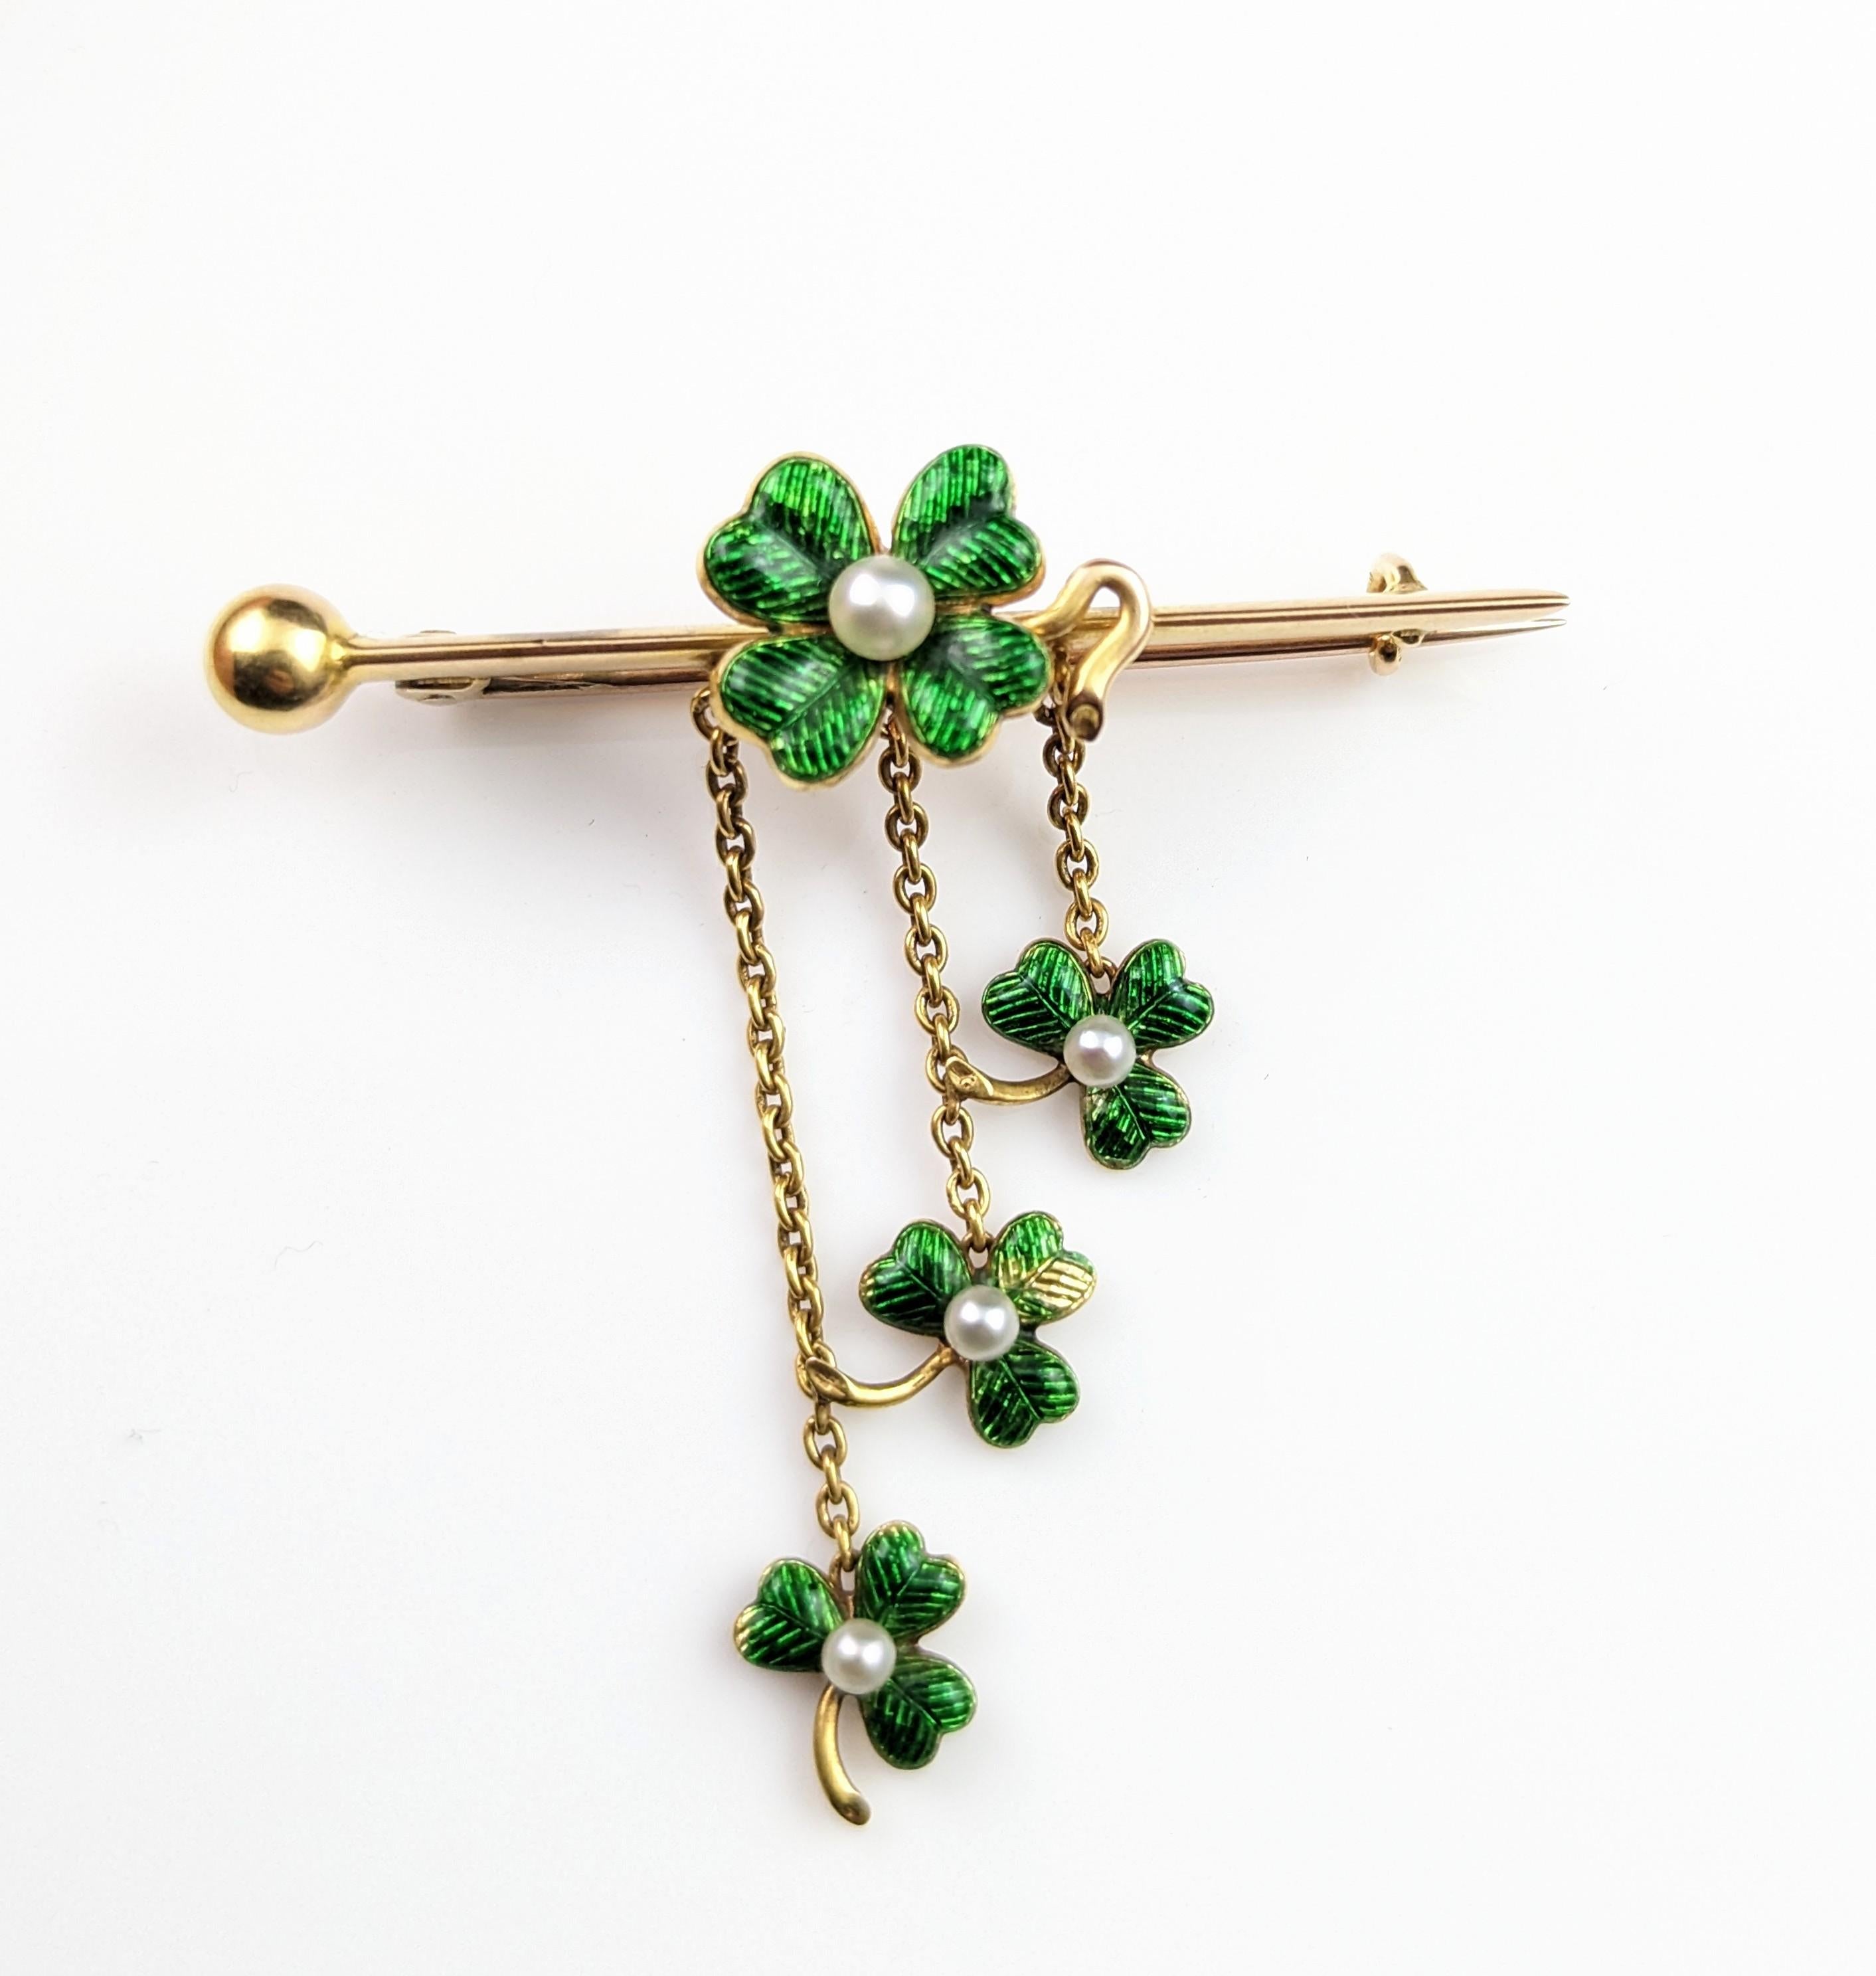 Antique Shamrock brooch, 15k gold, Guilloche enamel and seed pearl 5